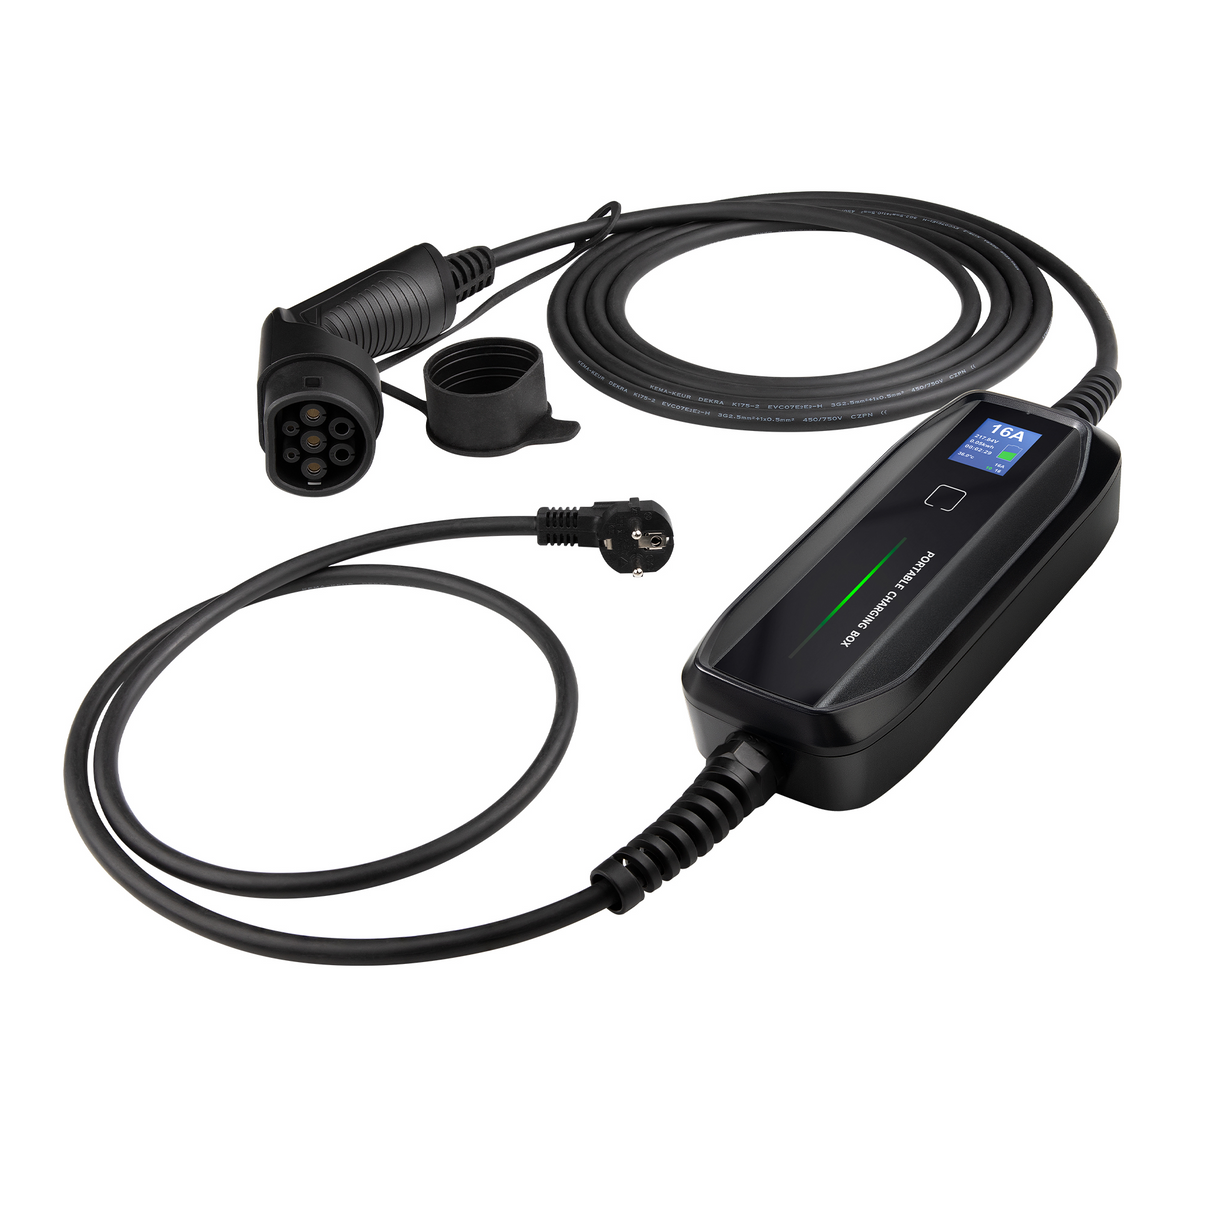 Mobile charger BMW 5 -Series - Besen with LCD - Type 2 to Schuko